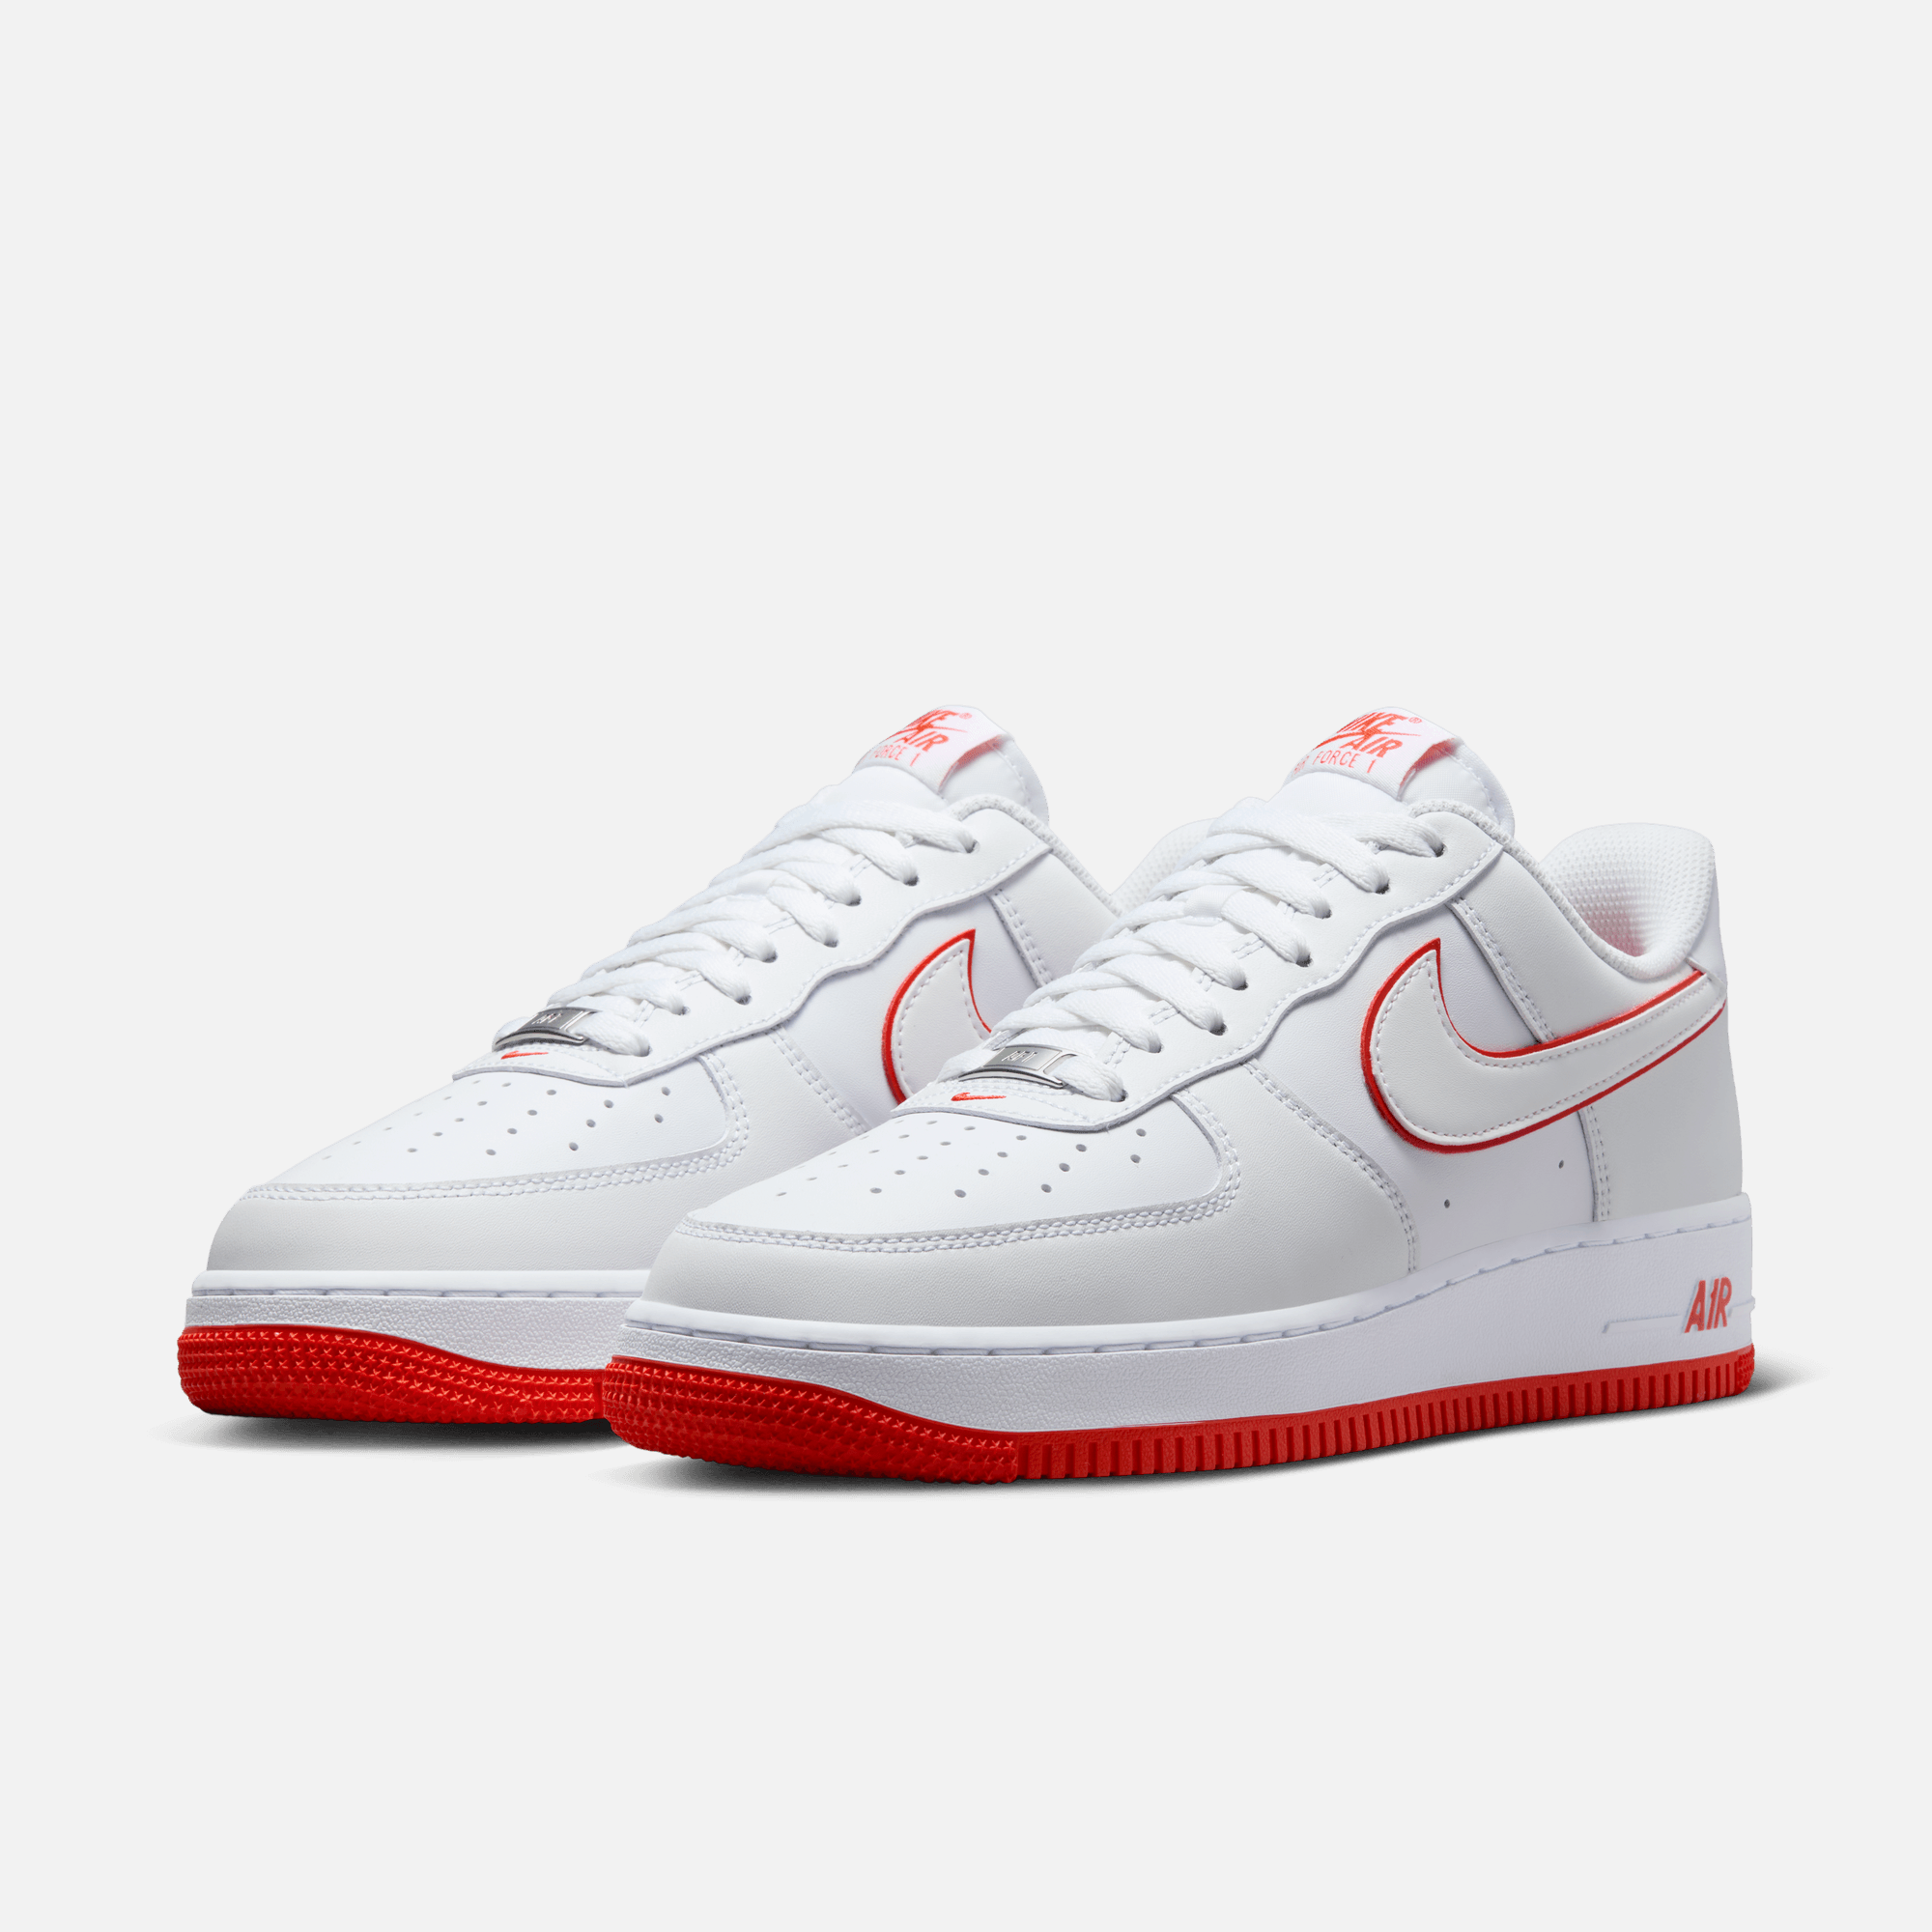  Nike Men's Air Force 1 Shoe, Picante Red-white, 12